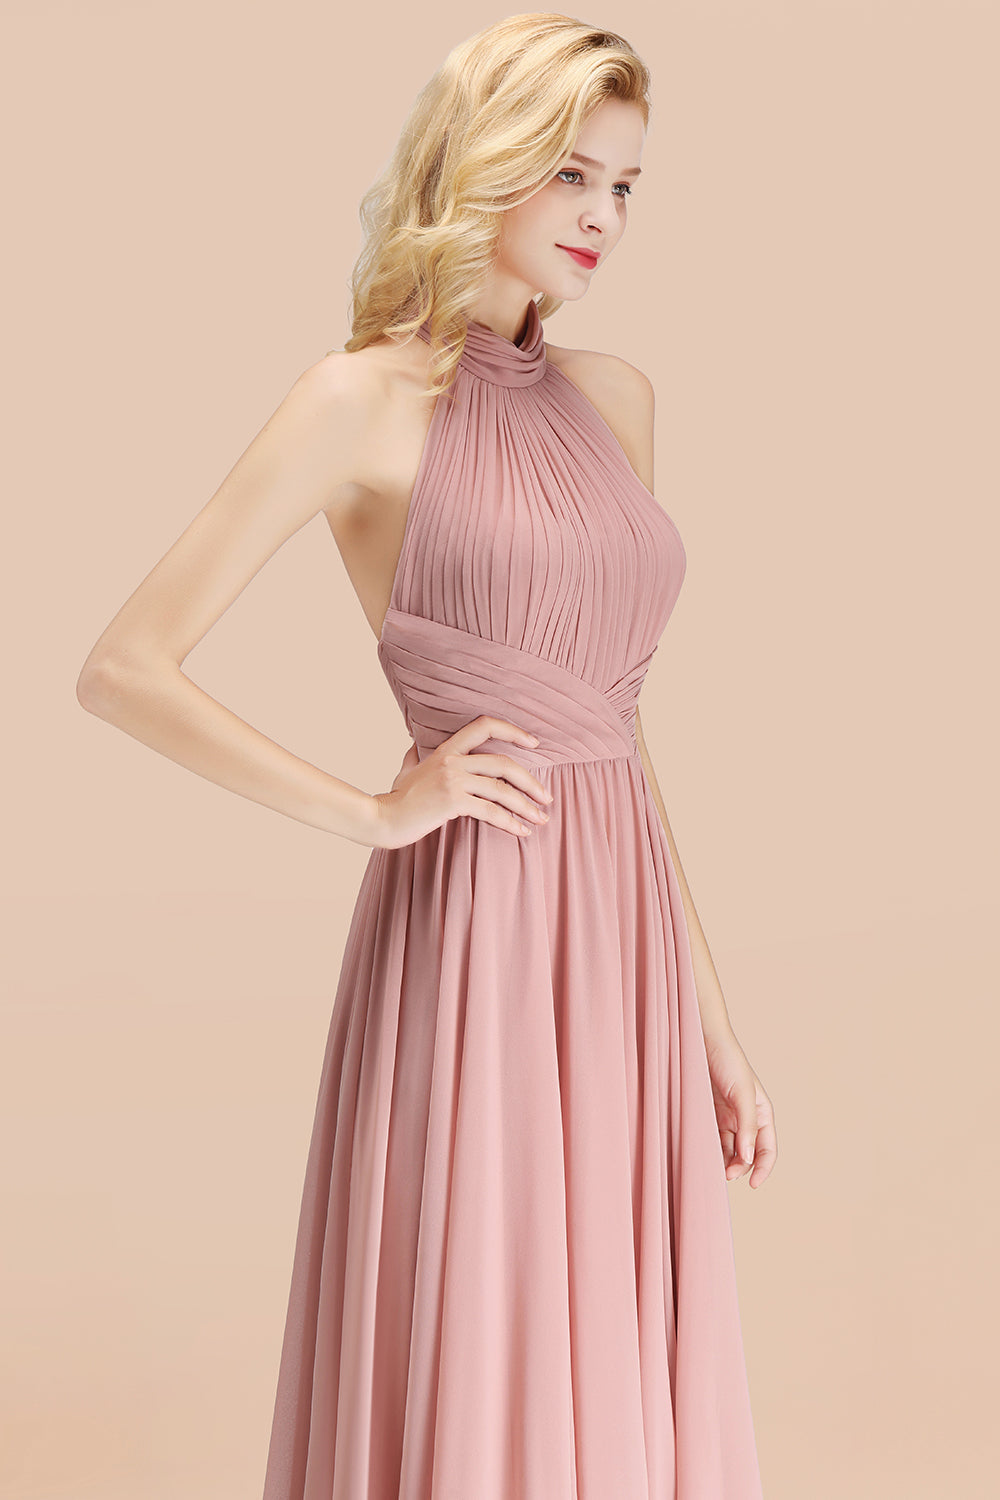 Gorgeous High-Neck Halter Backless Bridesmaid Dress Dusty Rose Chiffon Maid of Honor Dress